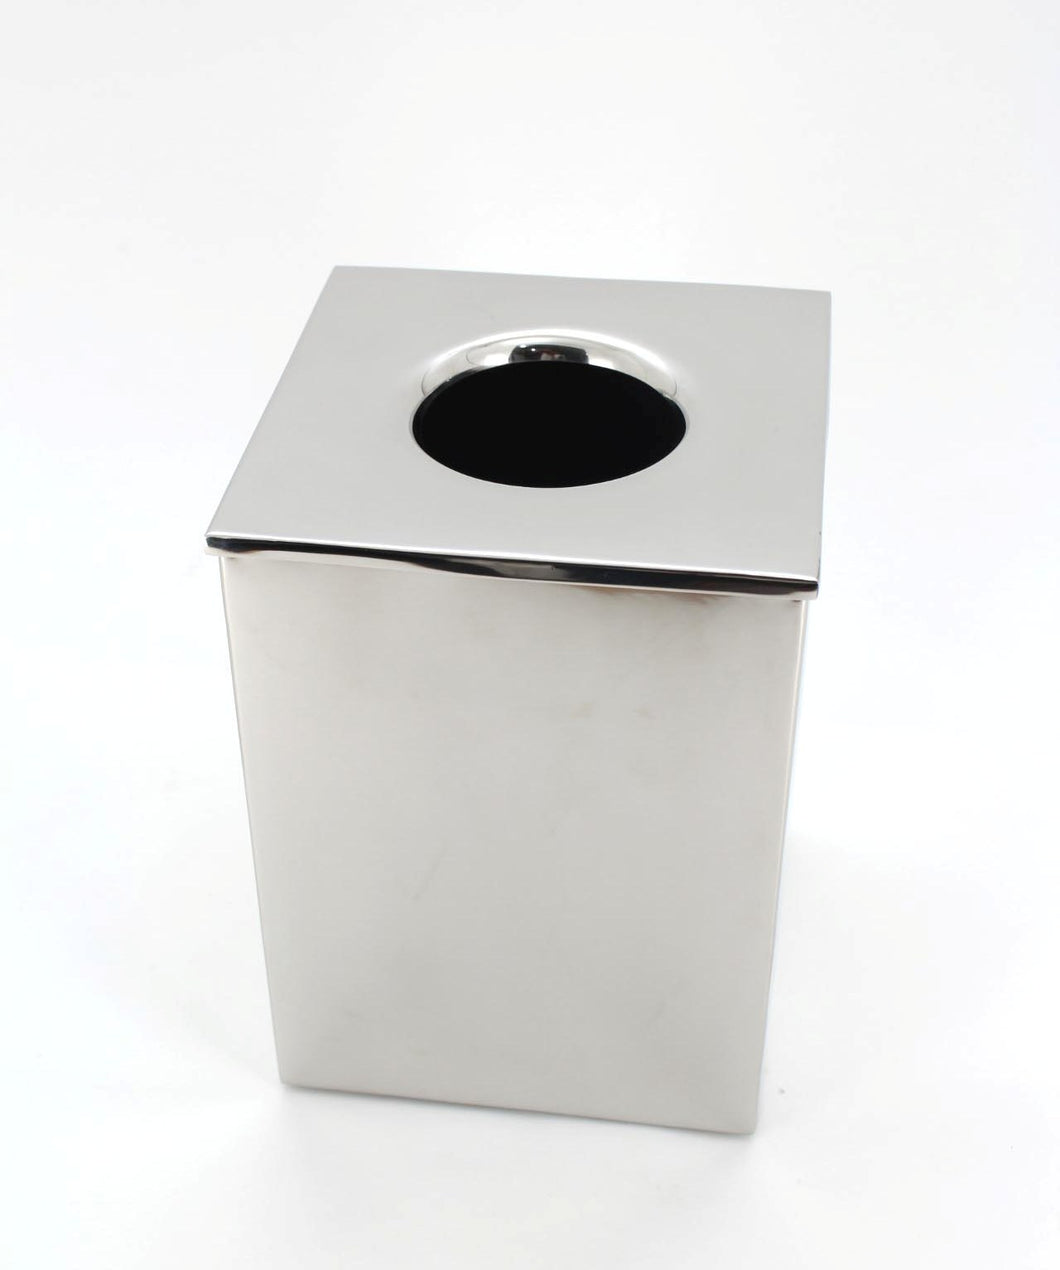 The Home Stainless Steel Waste Basket W/LID Chrome